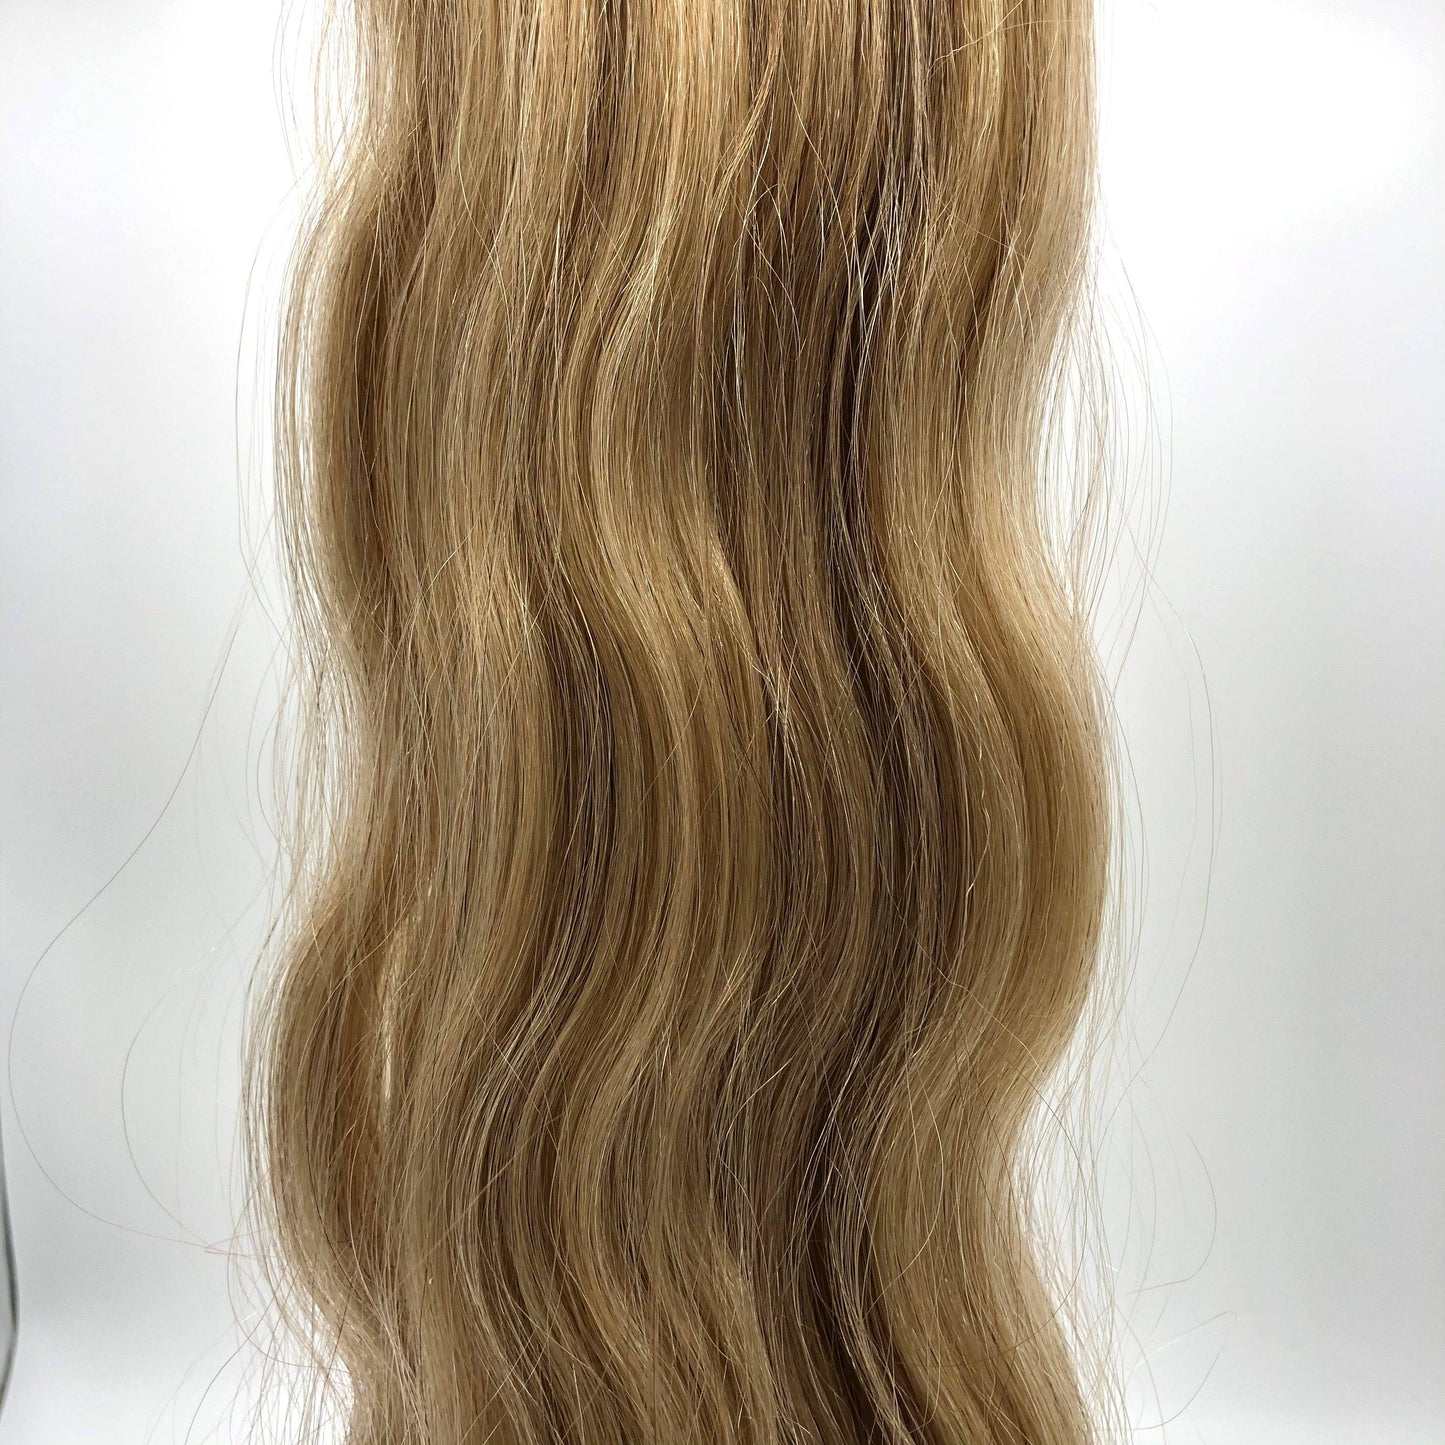 Narcia Remy Siberian - Micro Ring - 24" - VIP Extensions